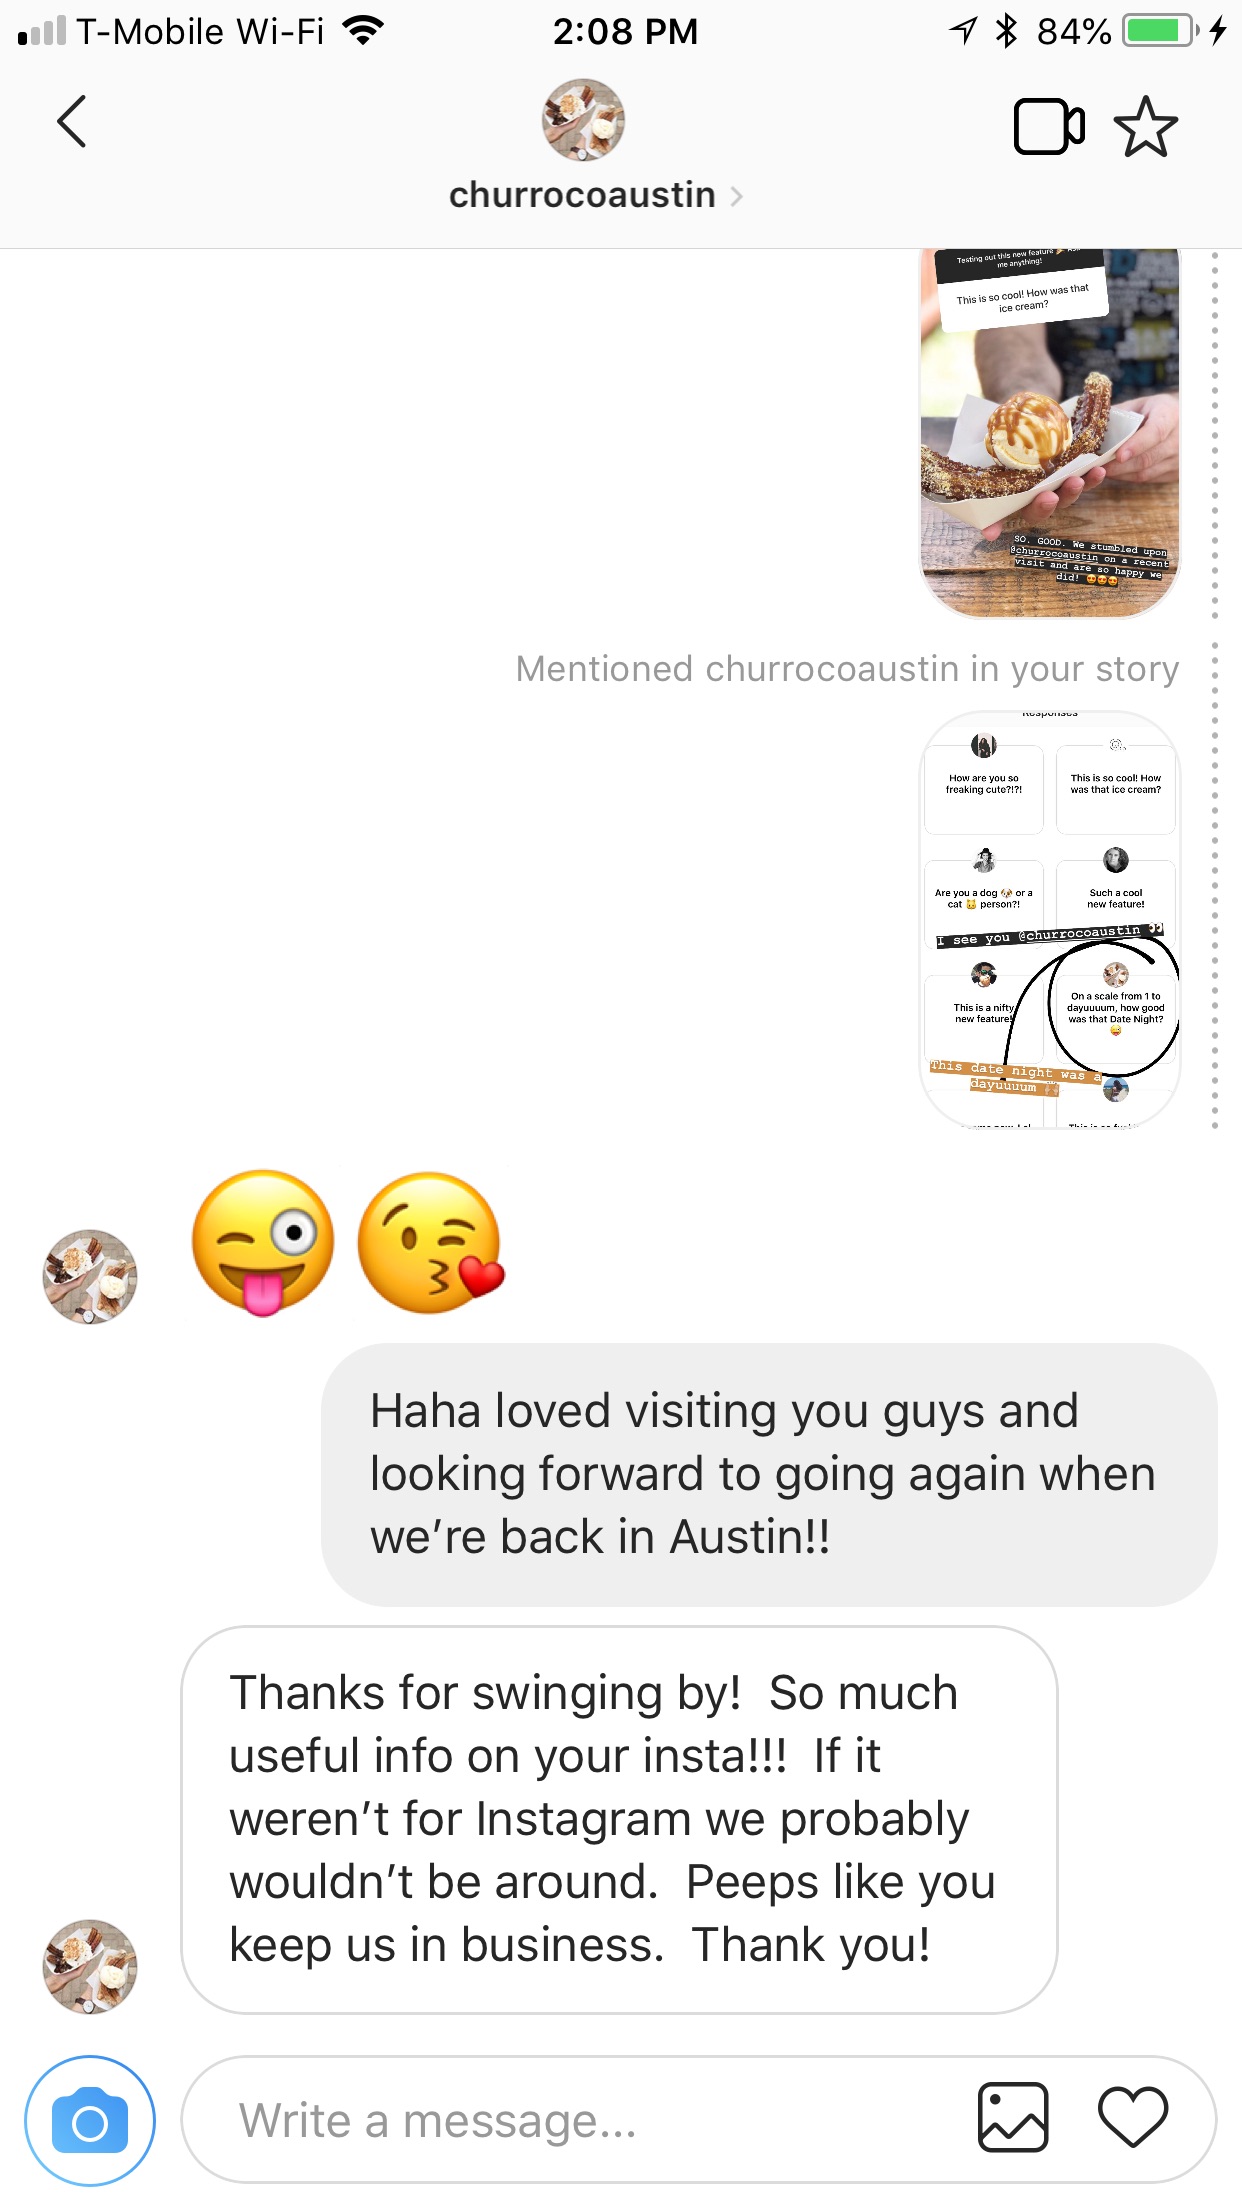 Here's what happened when I shared about my experience at Churro Co. in Austin on Instagram Stories...